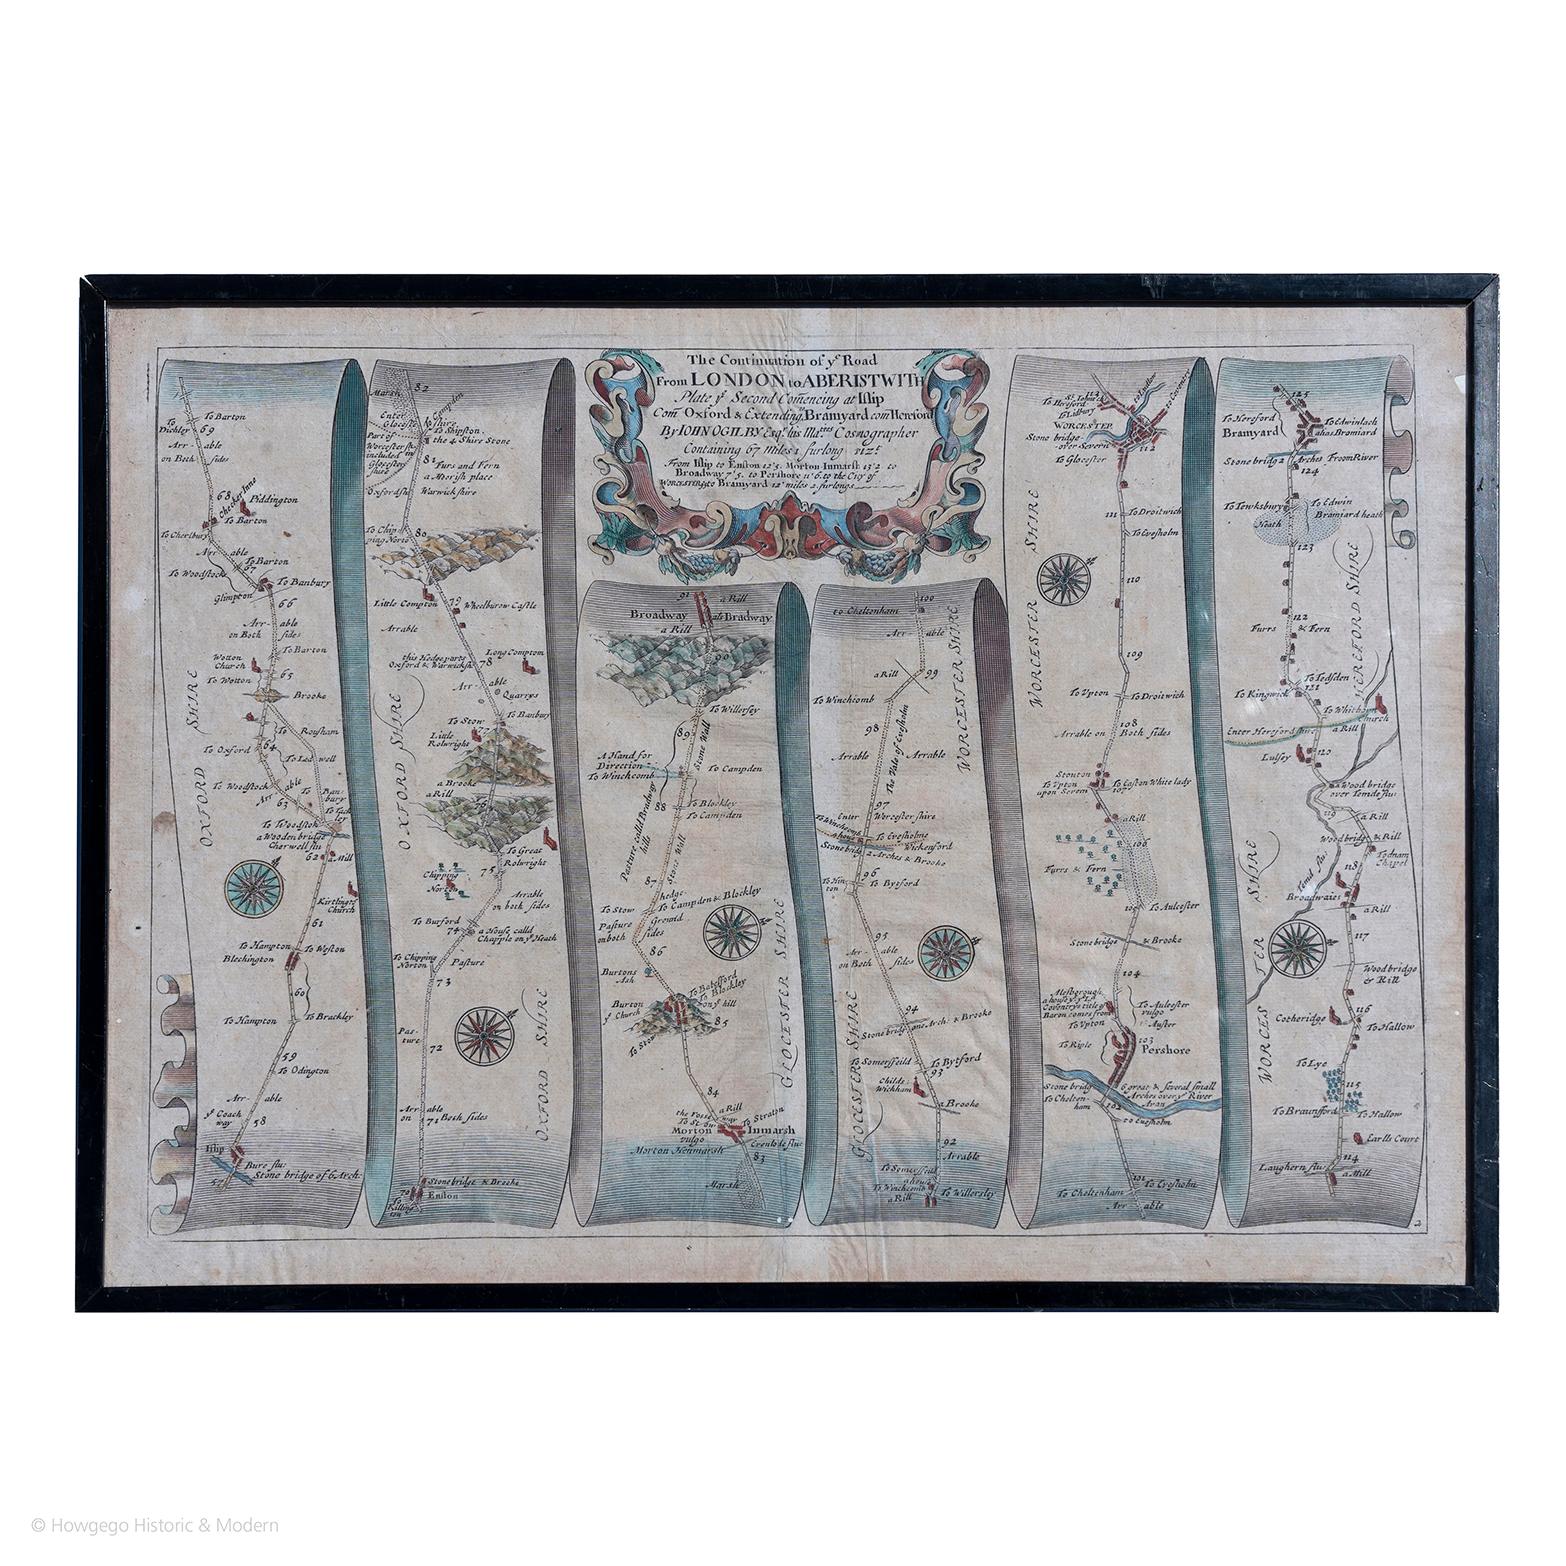 From John Ogilby's, 'Britannia, an Illustration of the Kingdom of
England and Dominion of Wales'.  First published in 1675 it remains the greatest advance in the mapping of England between the sixteenth-century surveys of Christopher Saxton and the